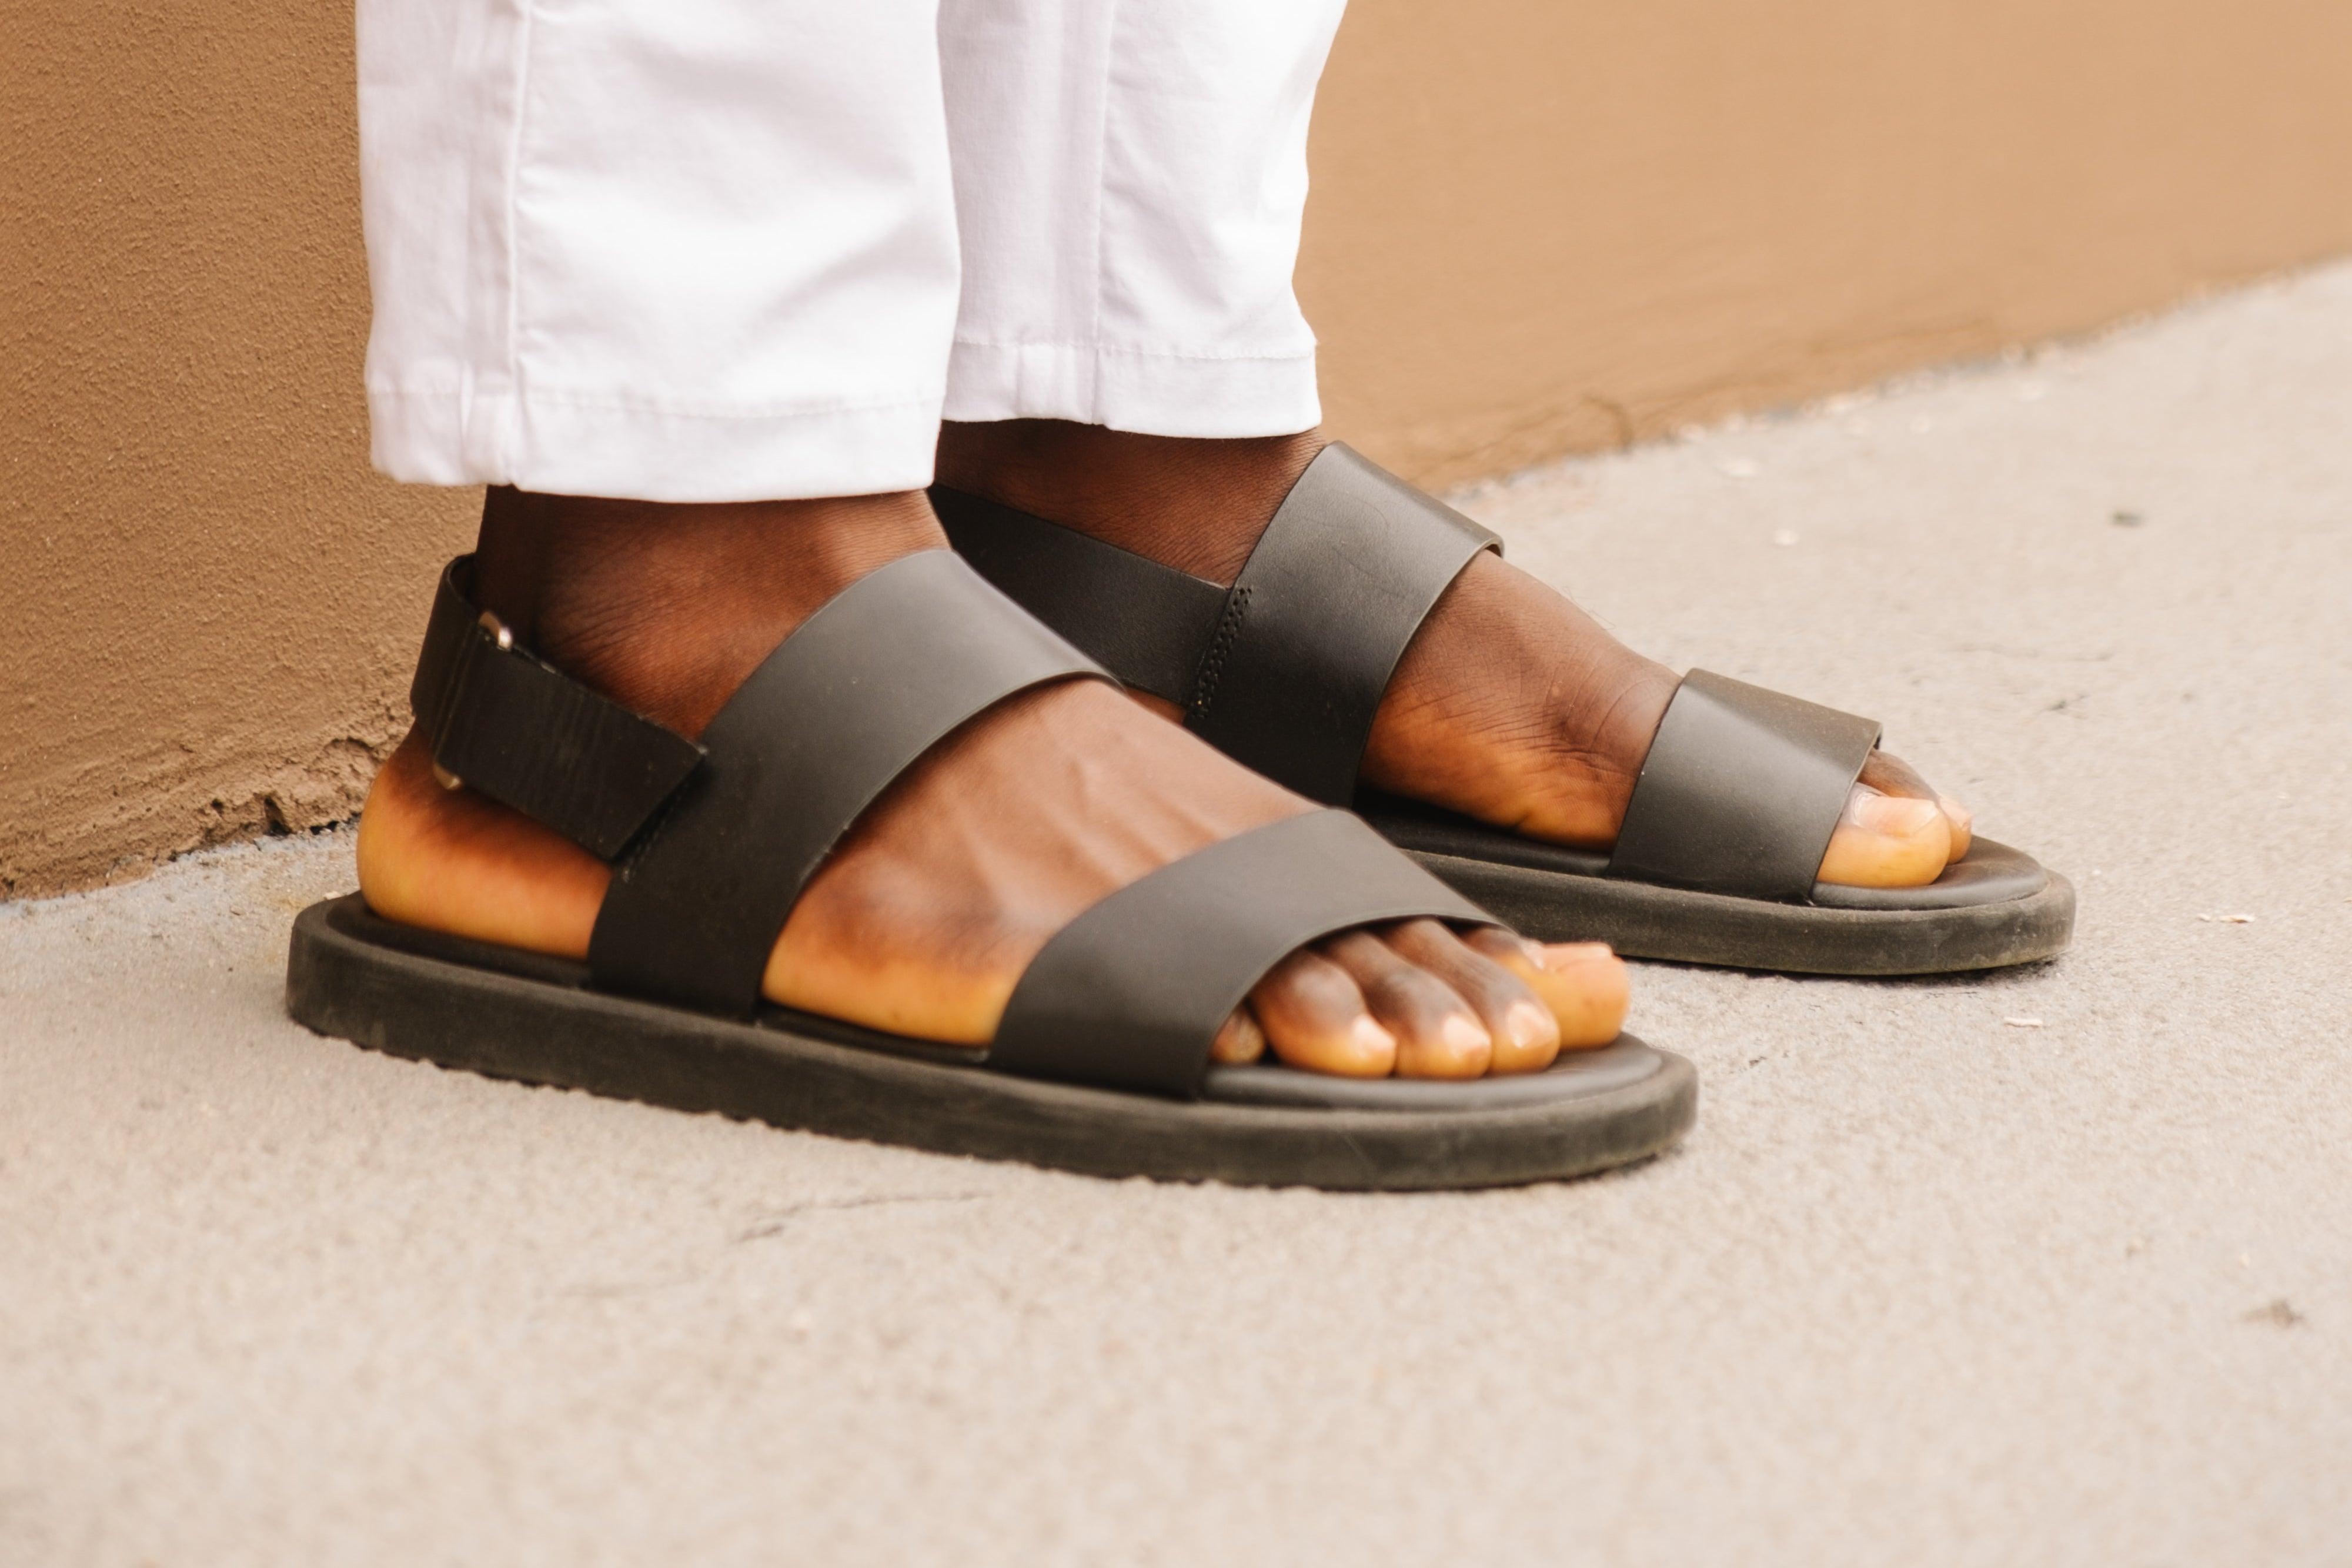 Men's Sandals and Slippers